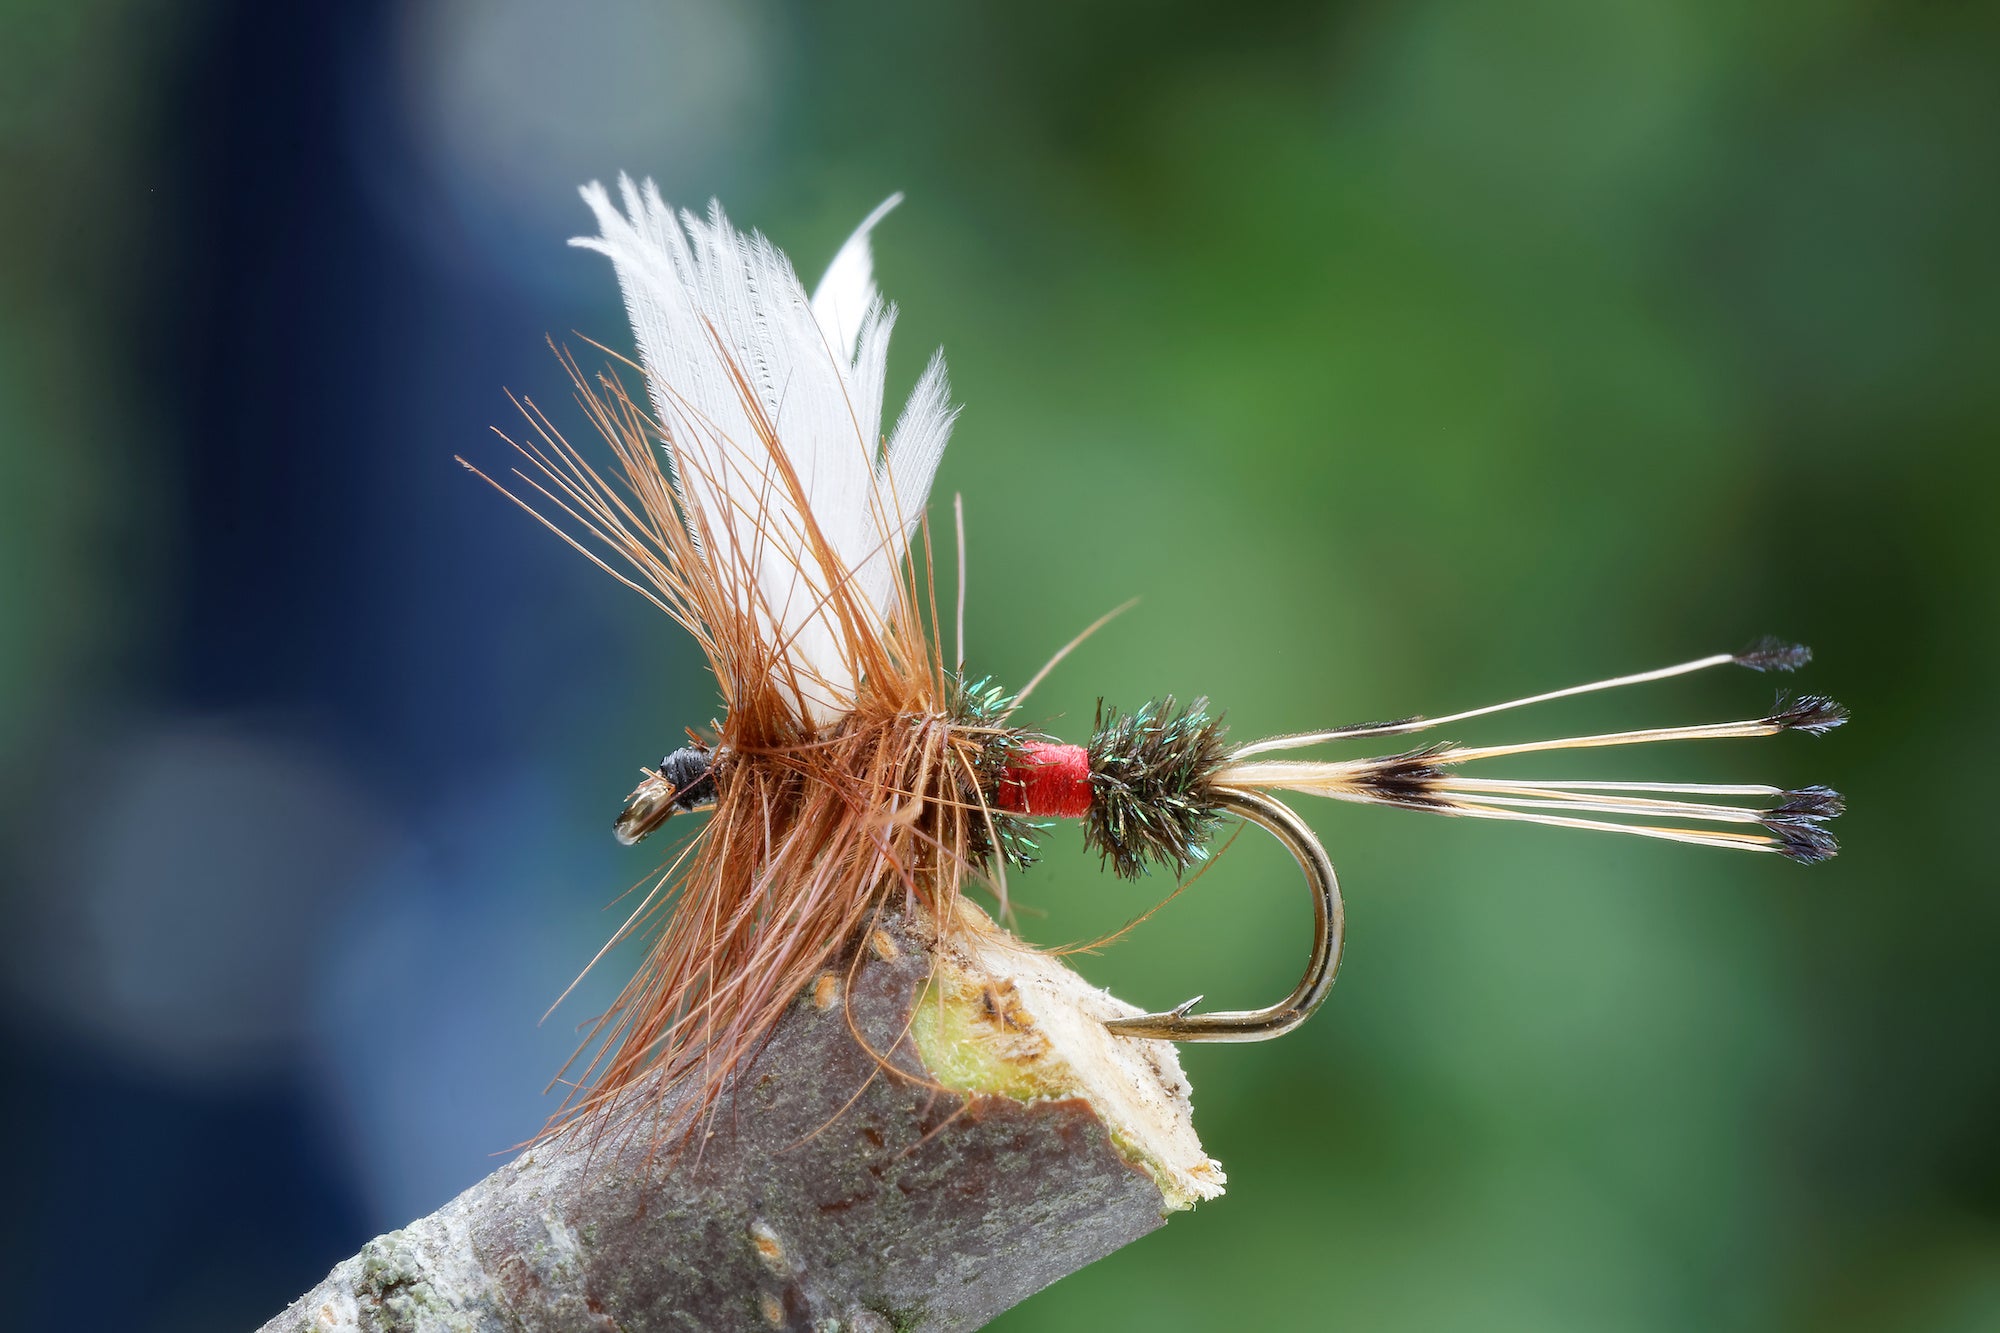 The Royal Coachman is one of America's oldest dry flies. It was designed in 1878 for catching brook trout on the East Coast.